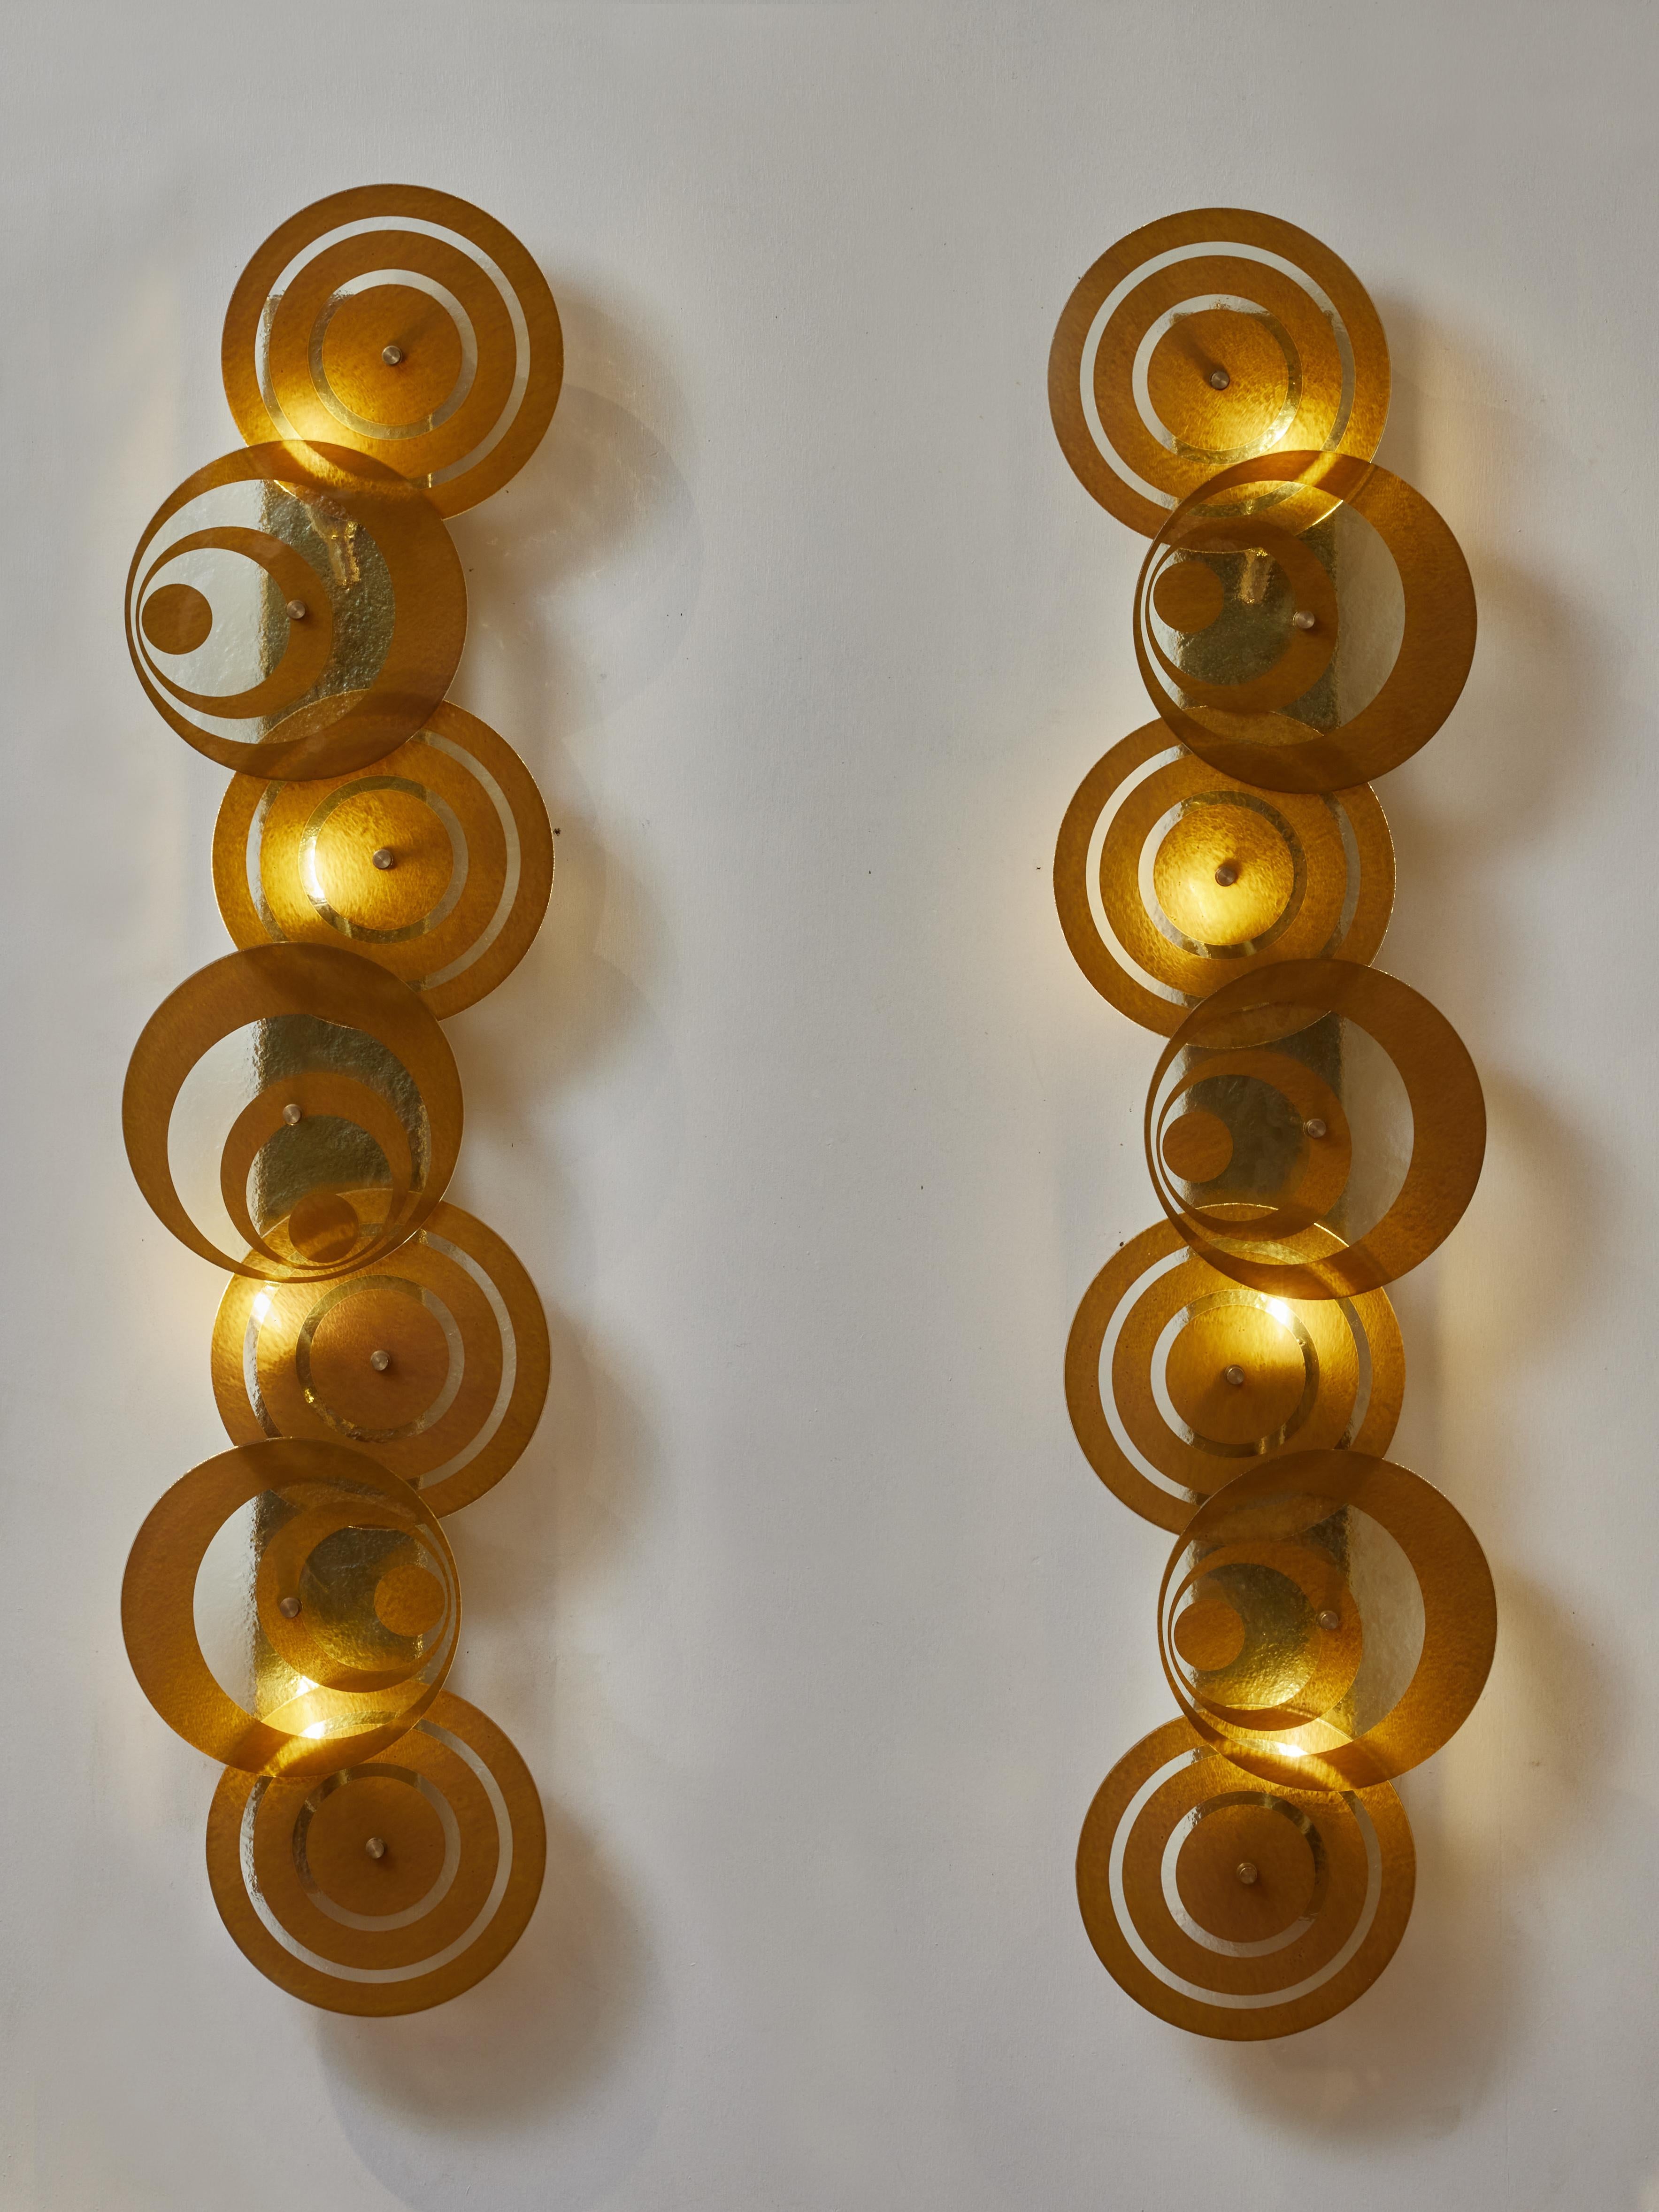 Pair of sconces in Murano glass and brass.
Creation by Studio Glustin.
Italy, 2023.